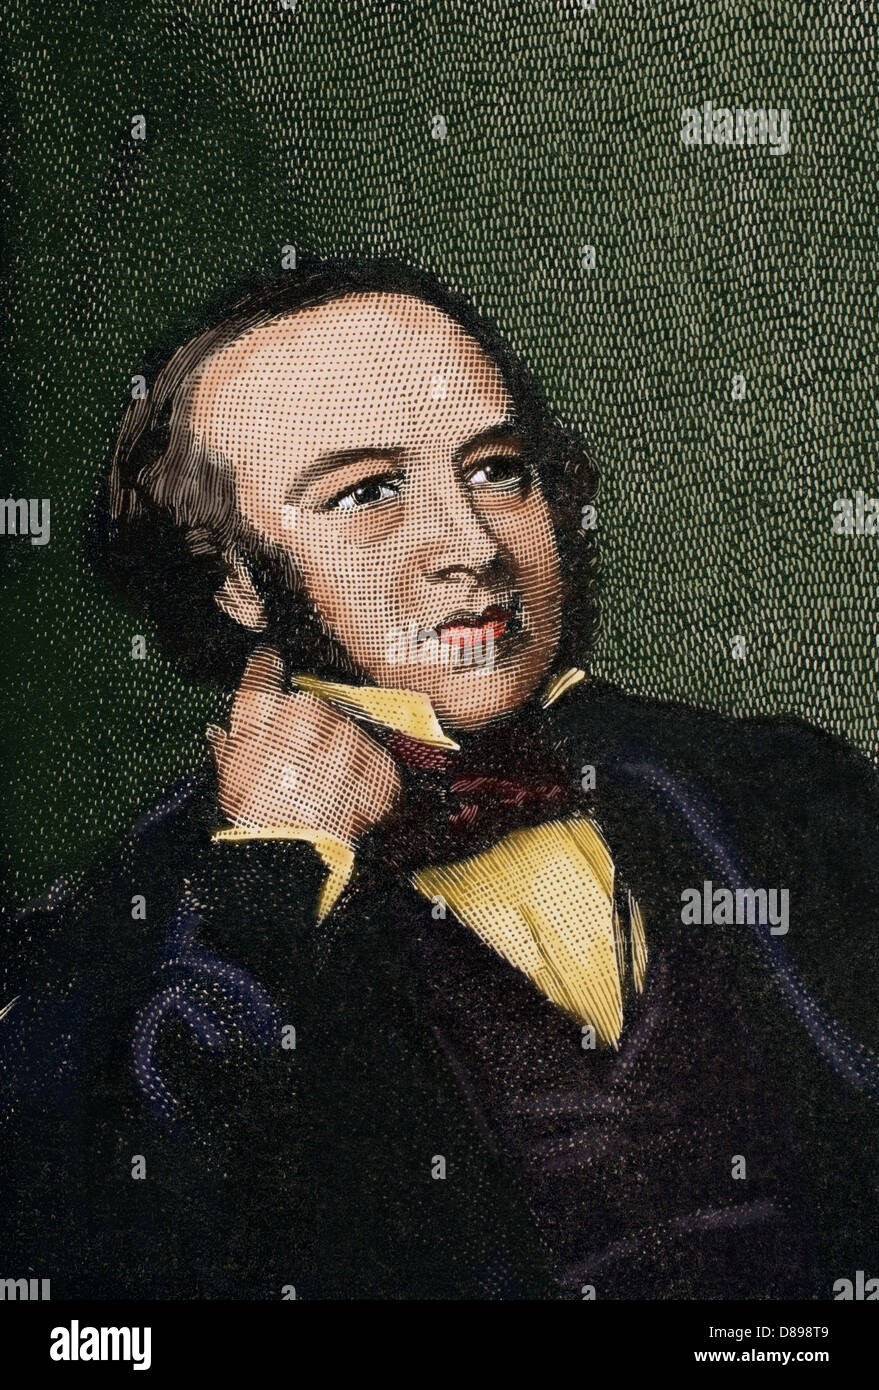 Sir Rowland Hill (1795-1879). Teacher and creator of the first British postage stamp in history: the Penny Black. Engraving. Stock Photo